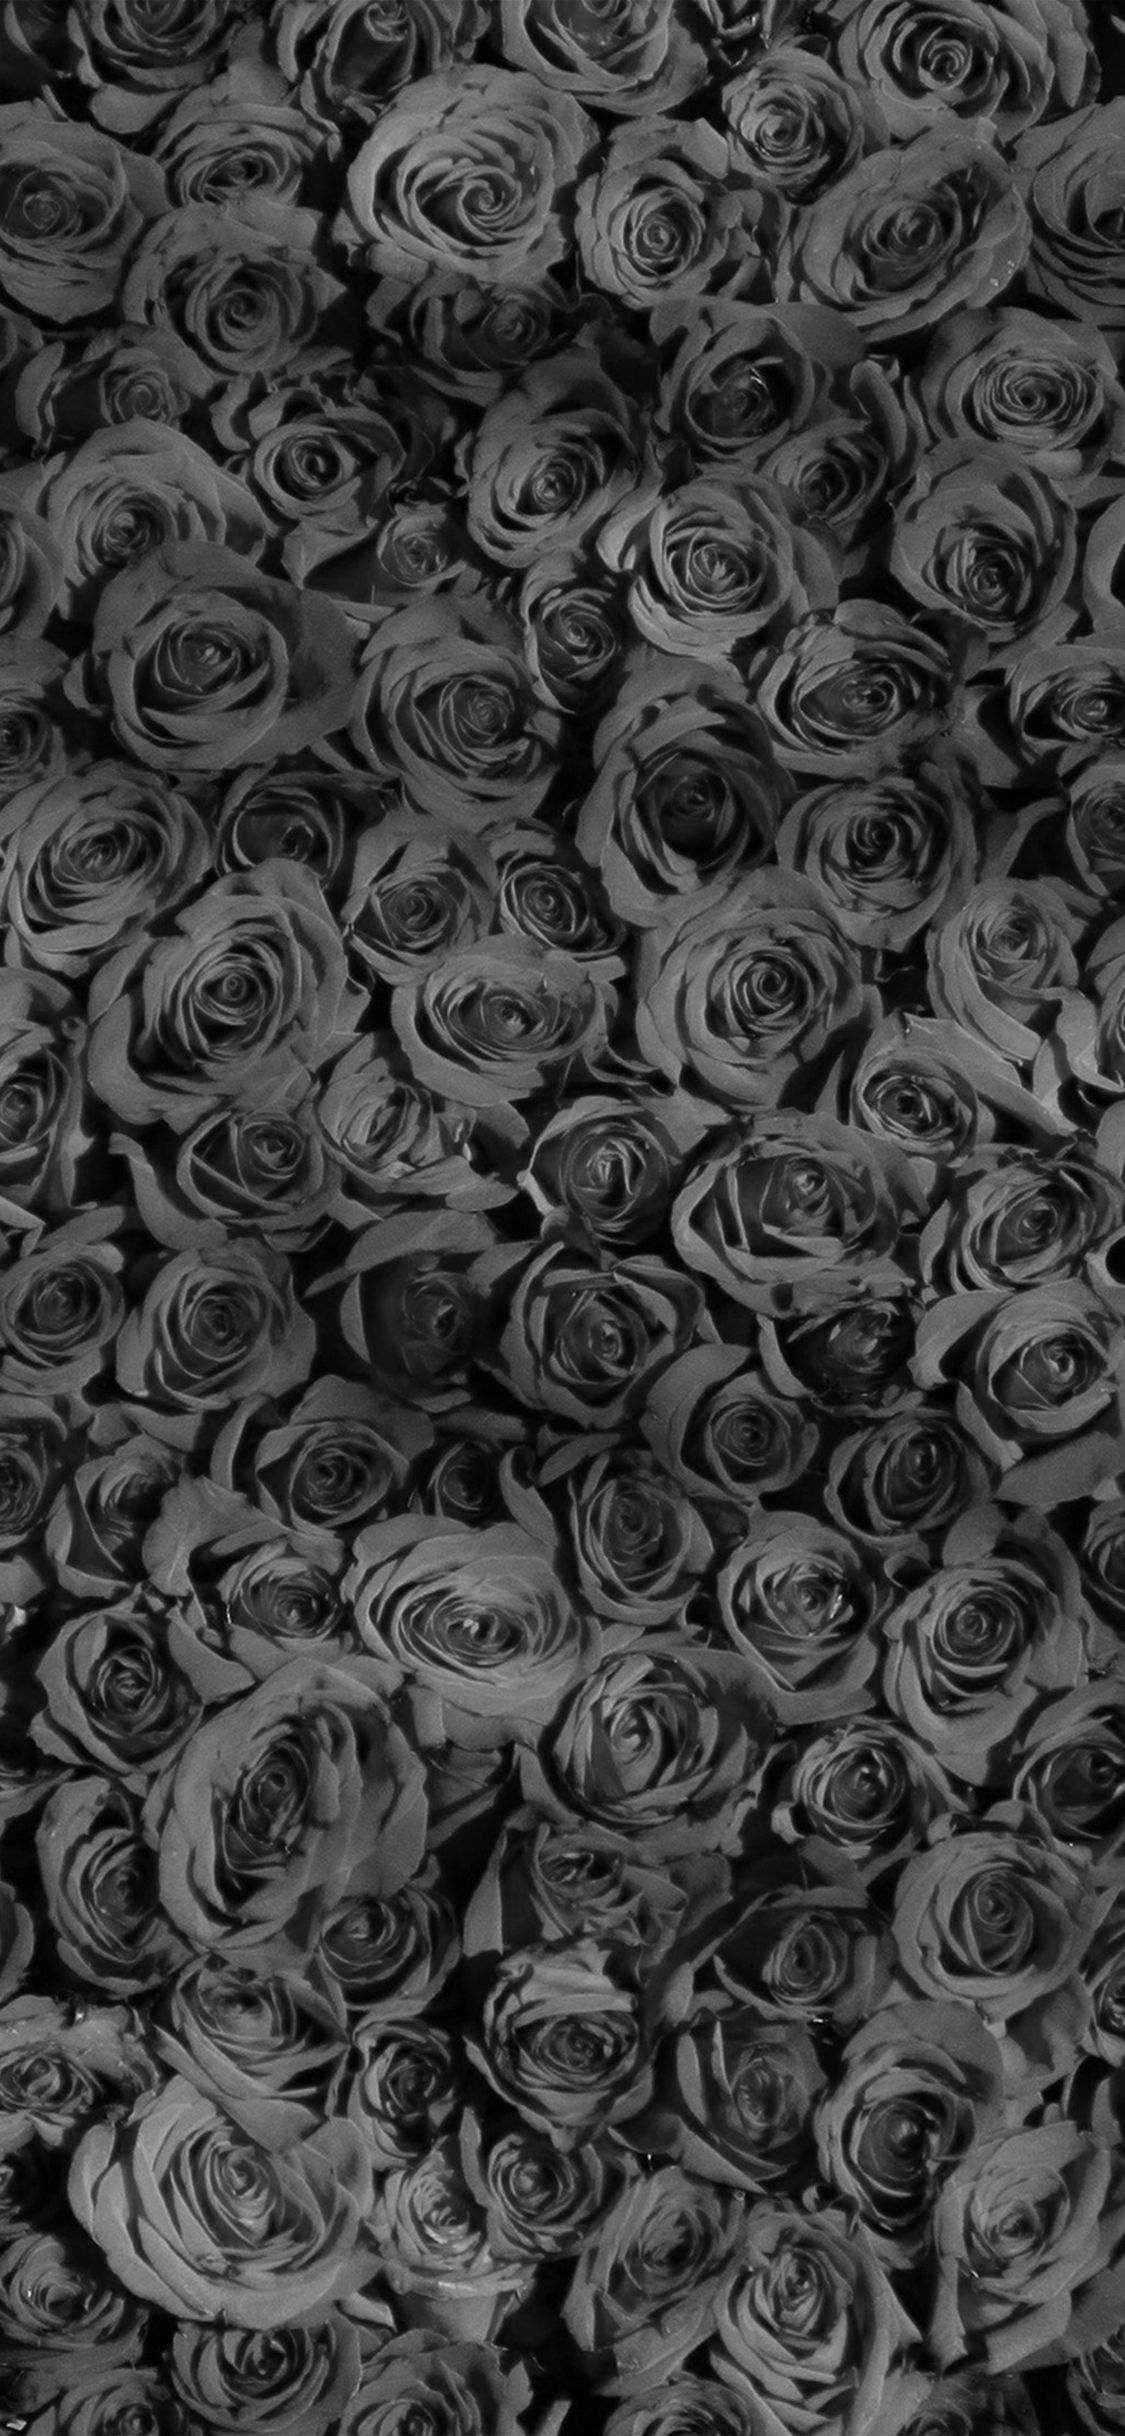 Black Rose Gold Iphone Wallpaper Images  Free Photos PNG Stickers  Wallpapers  Backgrounds  rawpixel